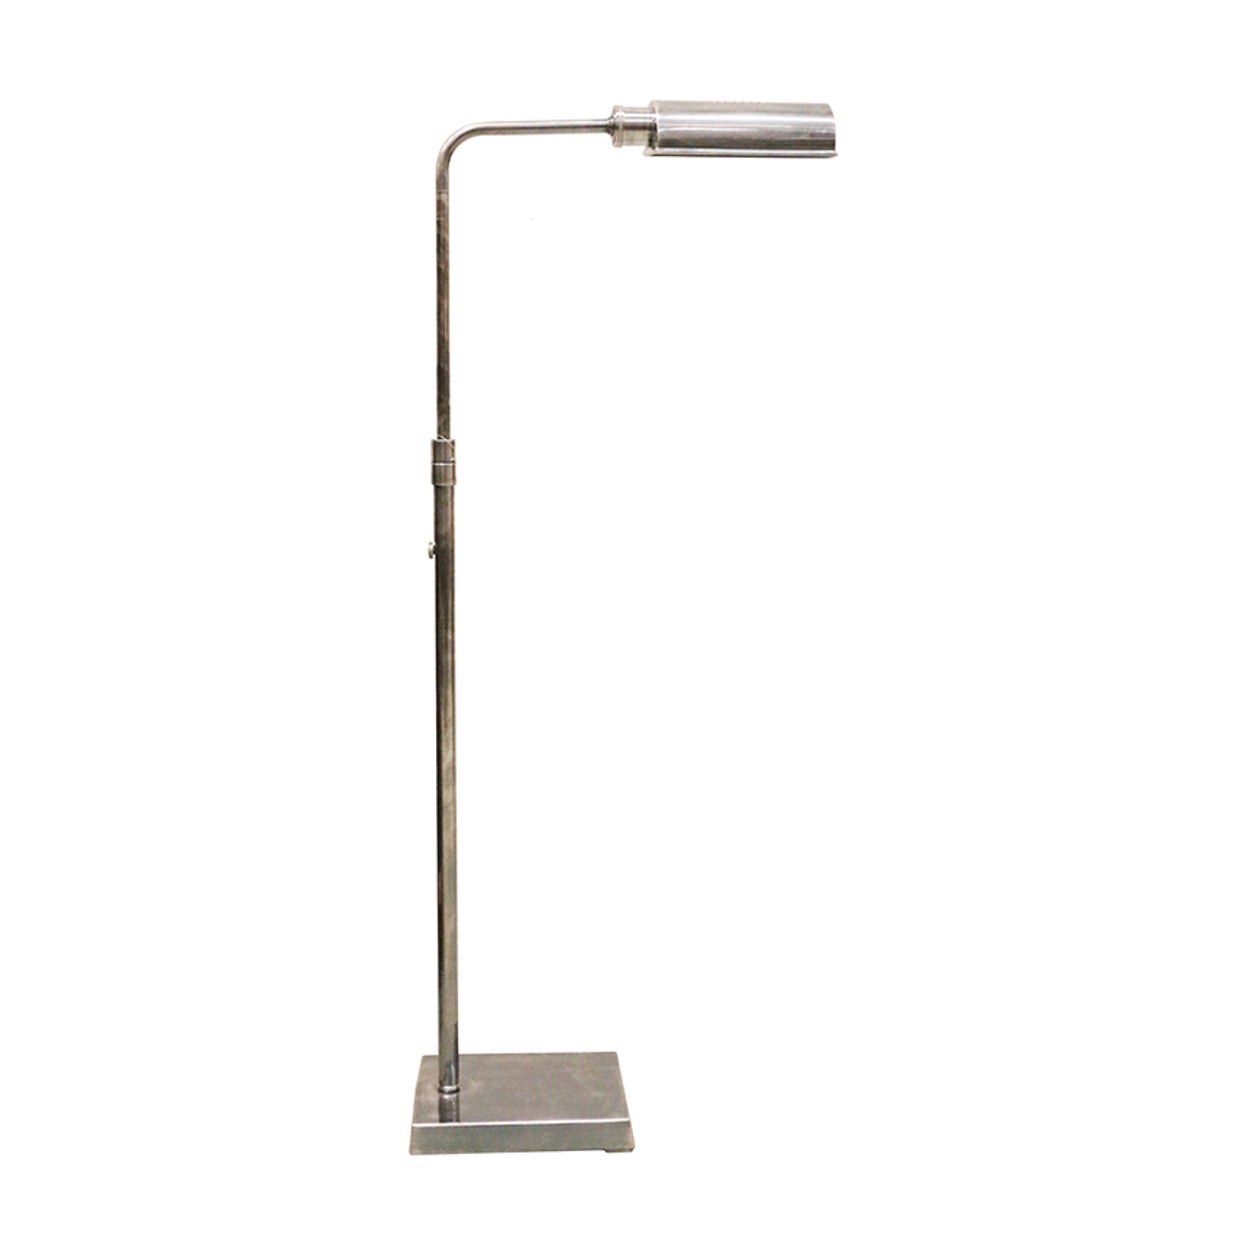 Apartmento Silver Floor Standing Adjustable Height Lamp Base